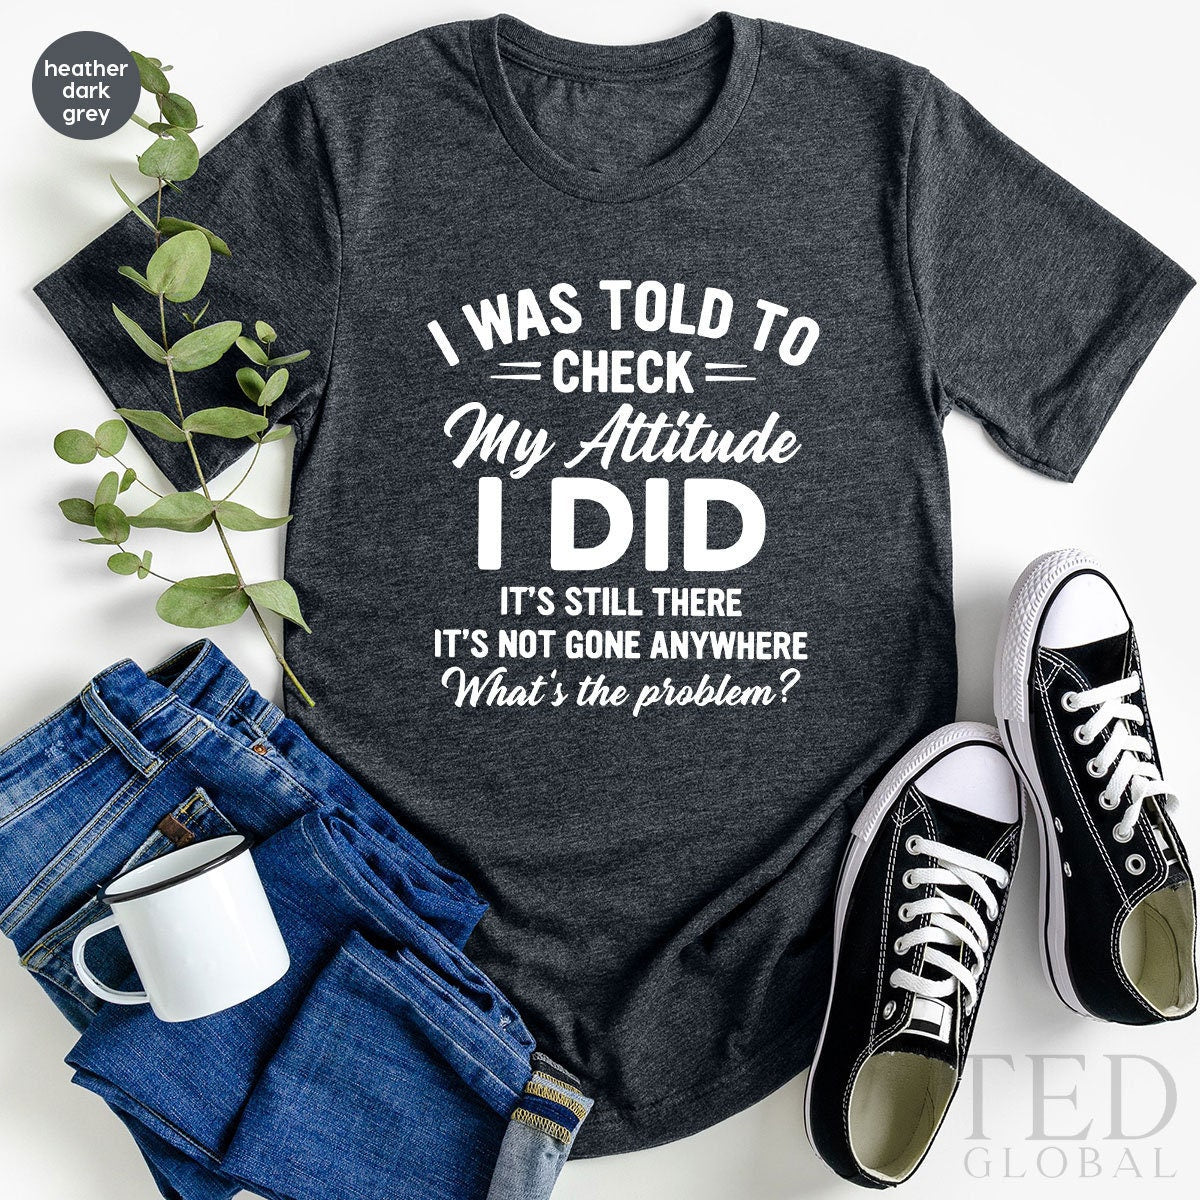 Adult Humor Shirt, I Was Told To Check My Attitude, Humorous Shit, Funny  Quote Shirt